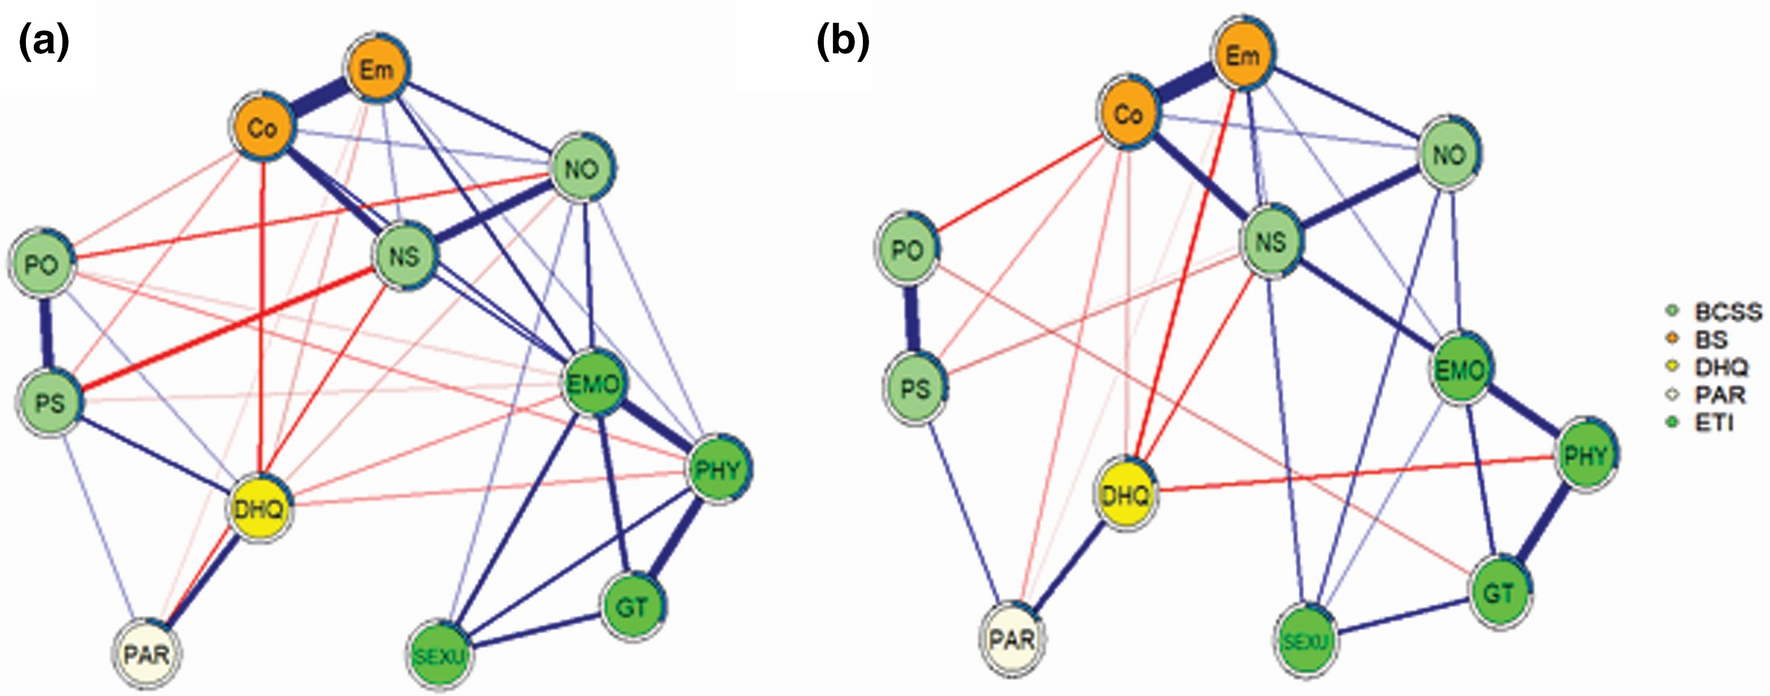 Network analysis of trauma in patients with early-stage psychosis |  Scientific Reports